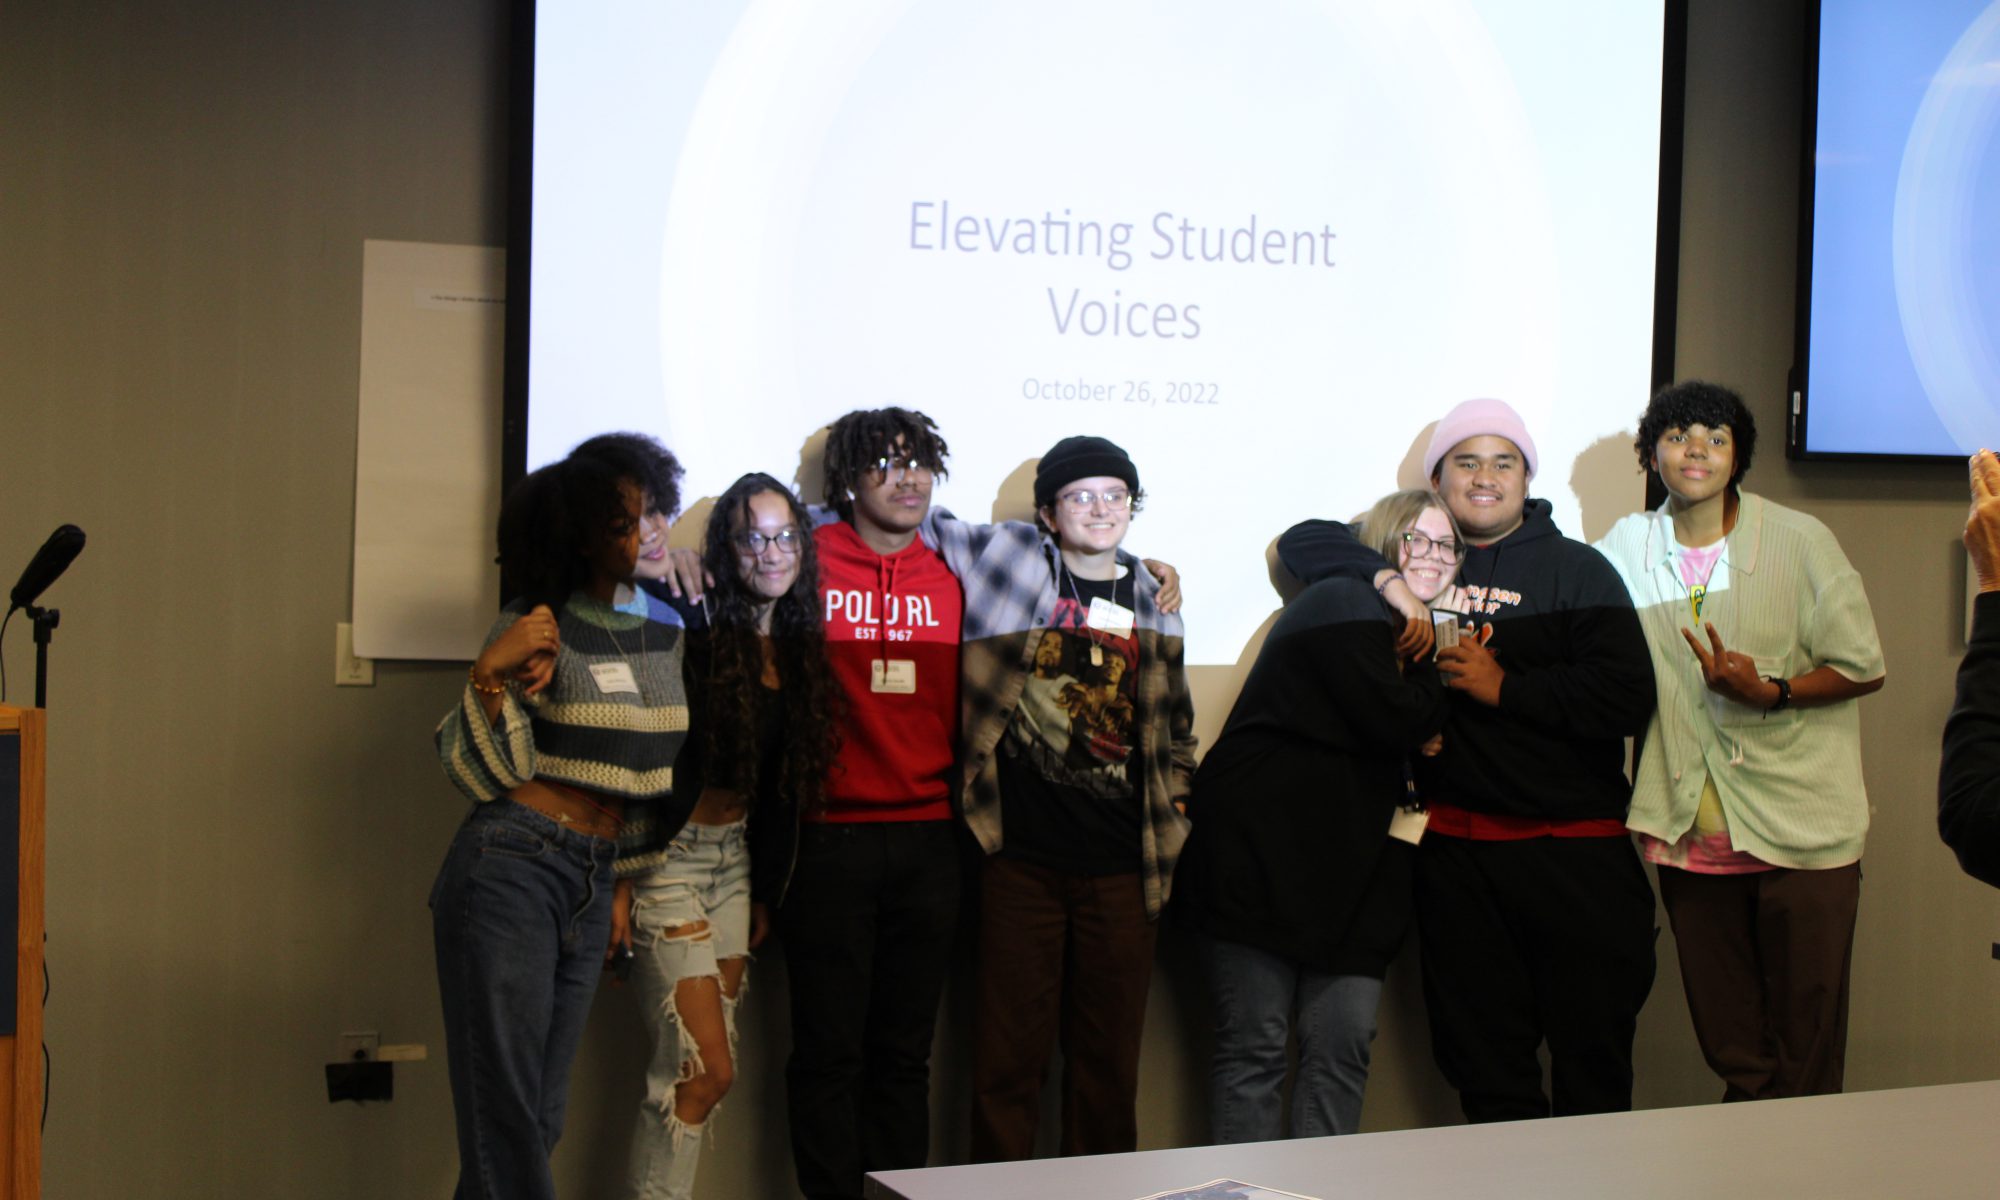 Seven students stand in front of projected screen that says "Elevating Student Voices"